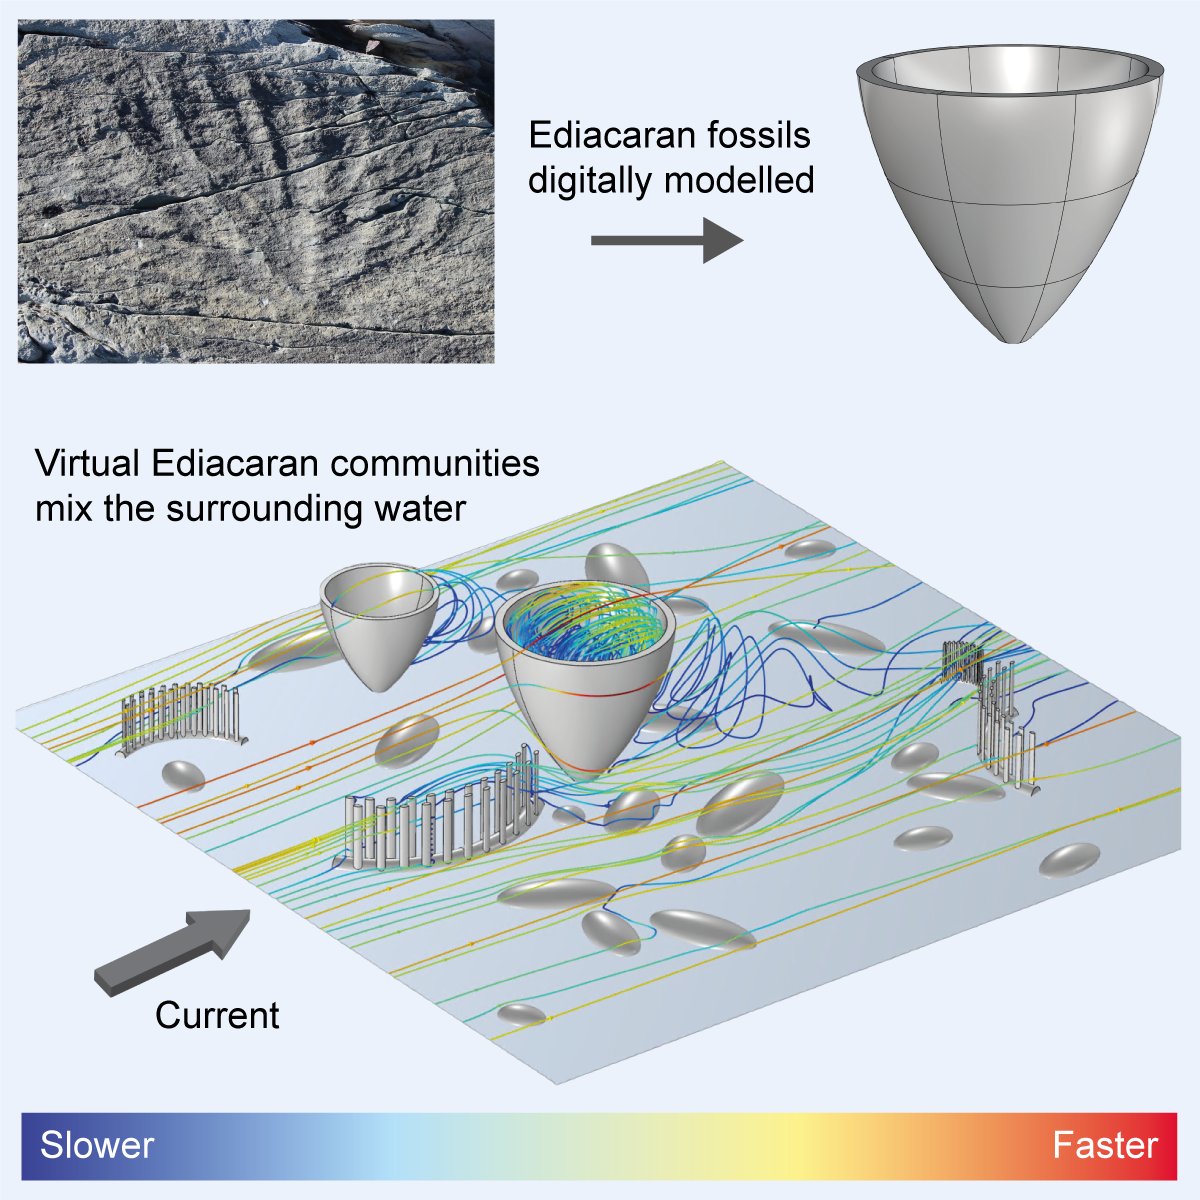 Our new @NERCscience-funded paper in @CurrentBiology, led by Susana Gutarra with @EGMitchell, @Frankie_Dunn_, @bramgibs, @raracicot & Simon Darroch, on the hydrodynamics of Mistaken Point Ediacaran communities and their role in mixing the water column: cell.com/current-biolog…